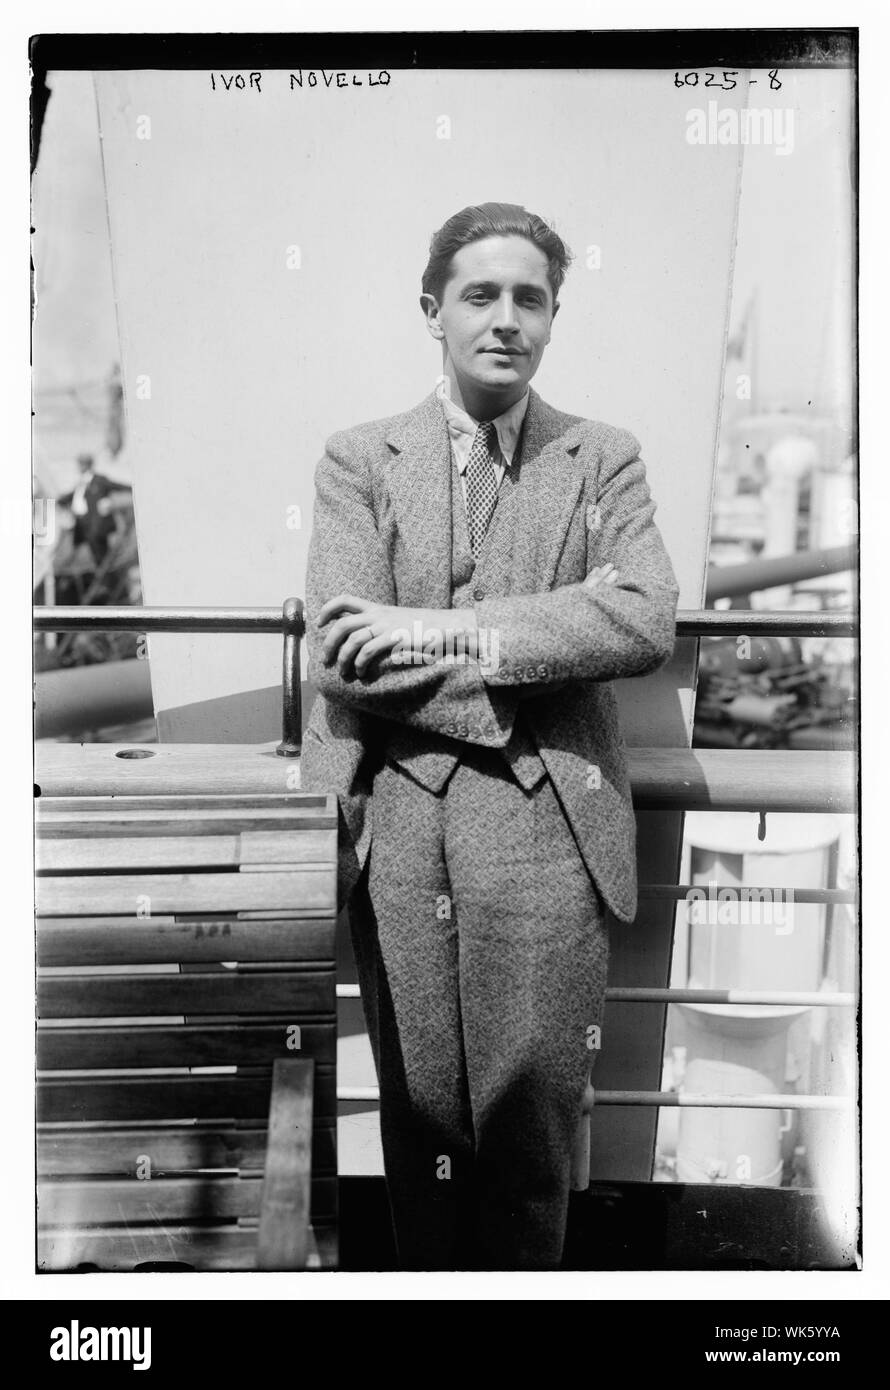 Ivor Novello, Welsh actor and songwriter Stock Photo